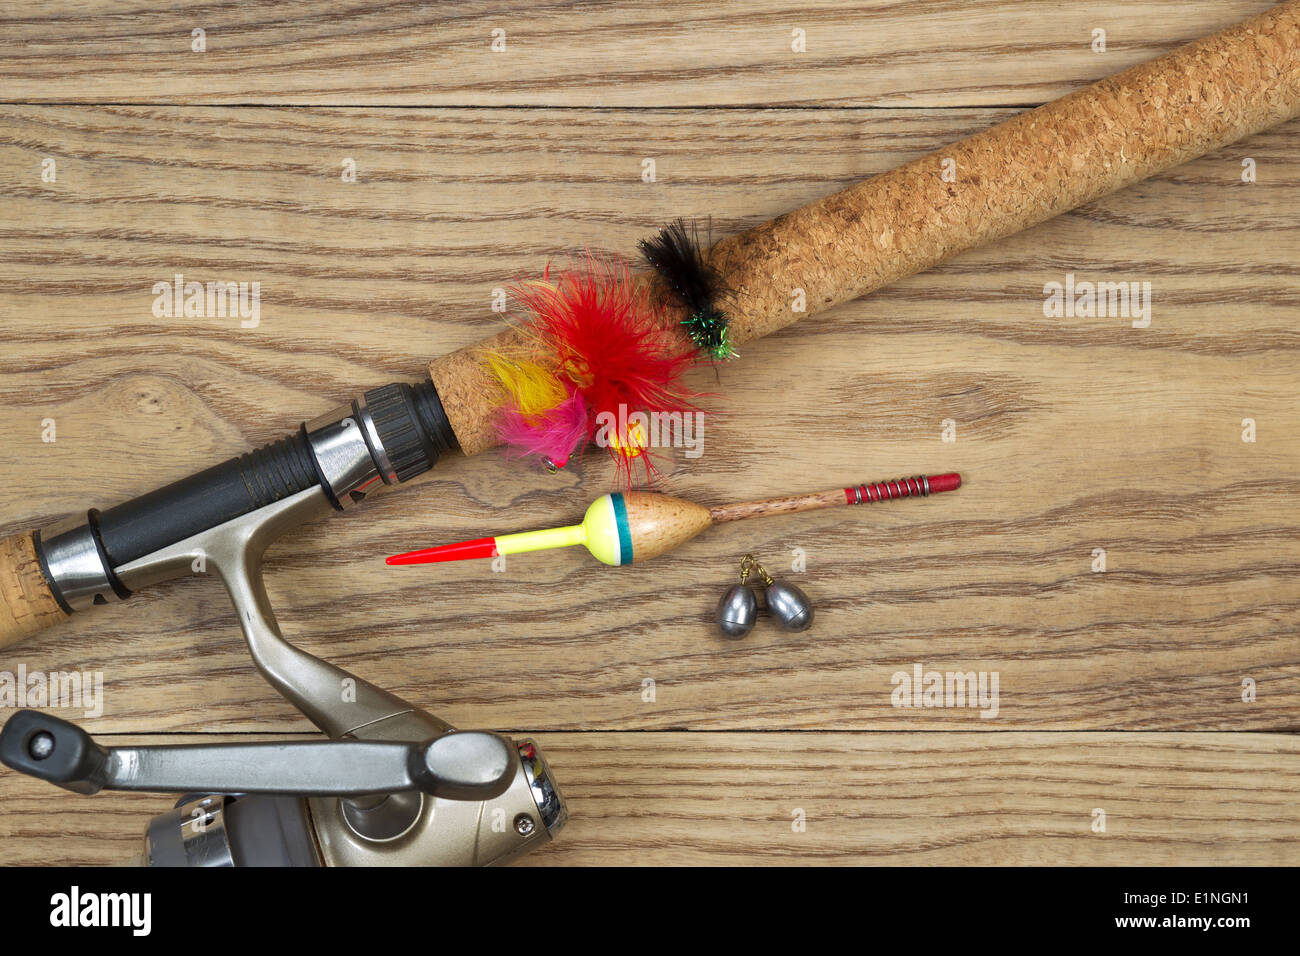 Horizontal top view photo of fishing lures, bobbers, sinkers, cork pole handle and part of reel on faded wood Stock Photo